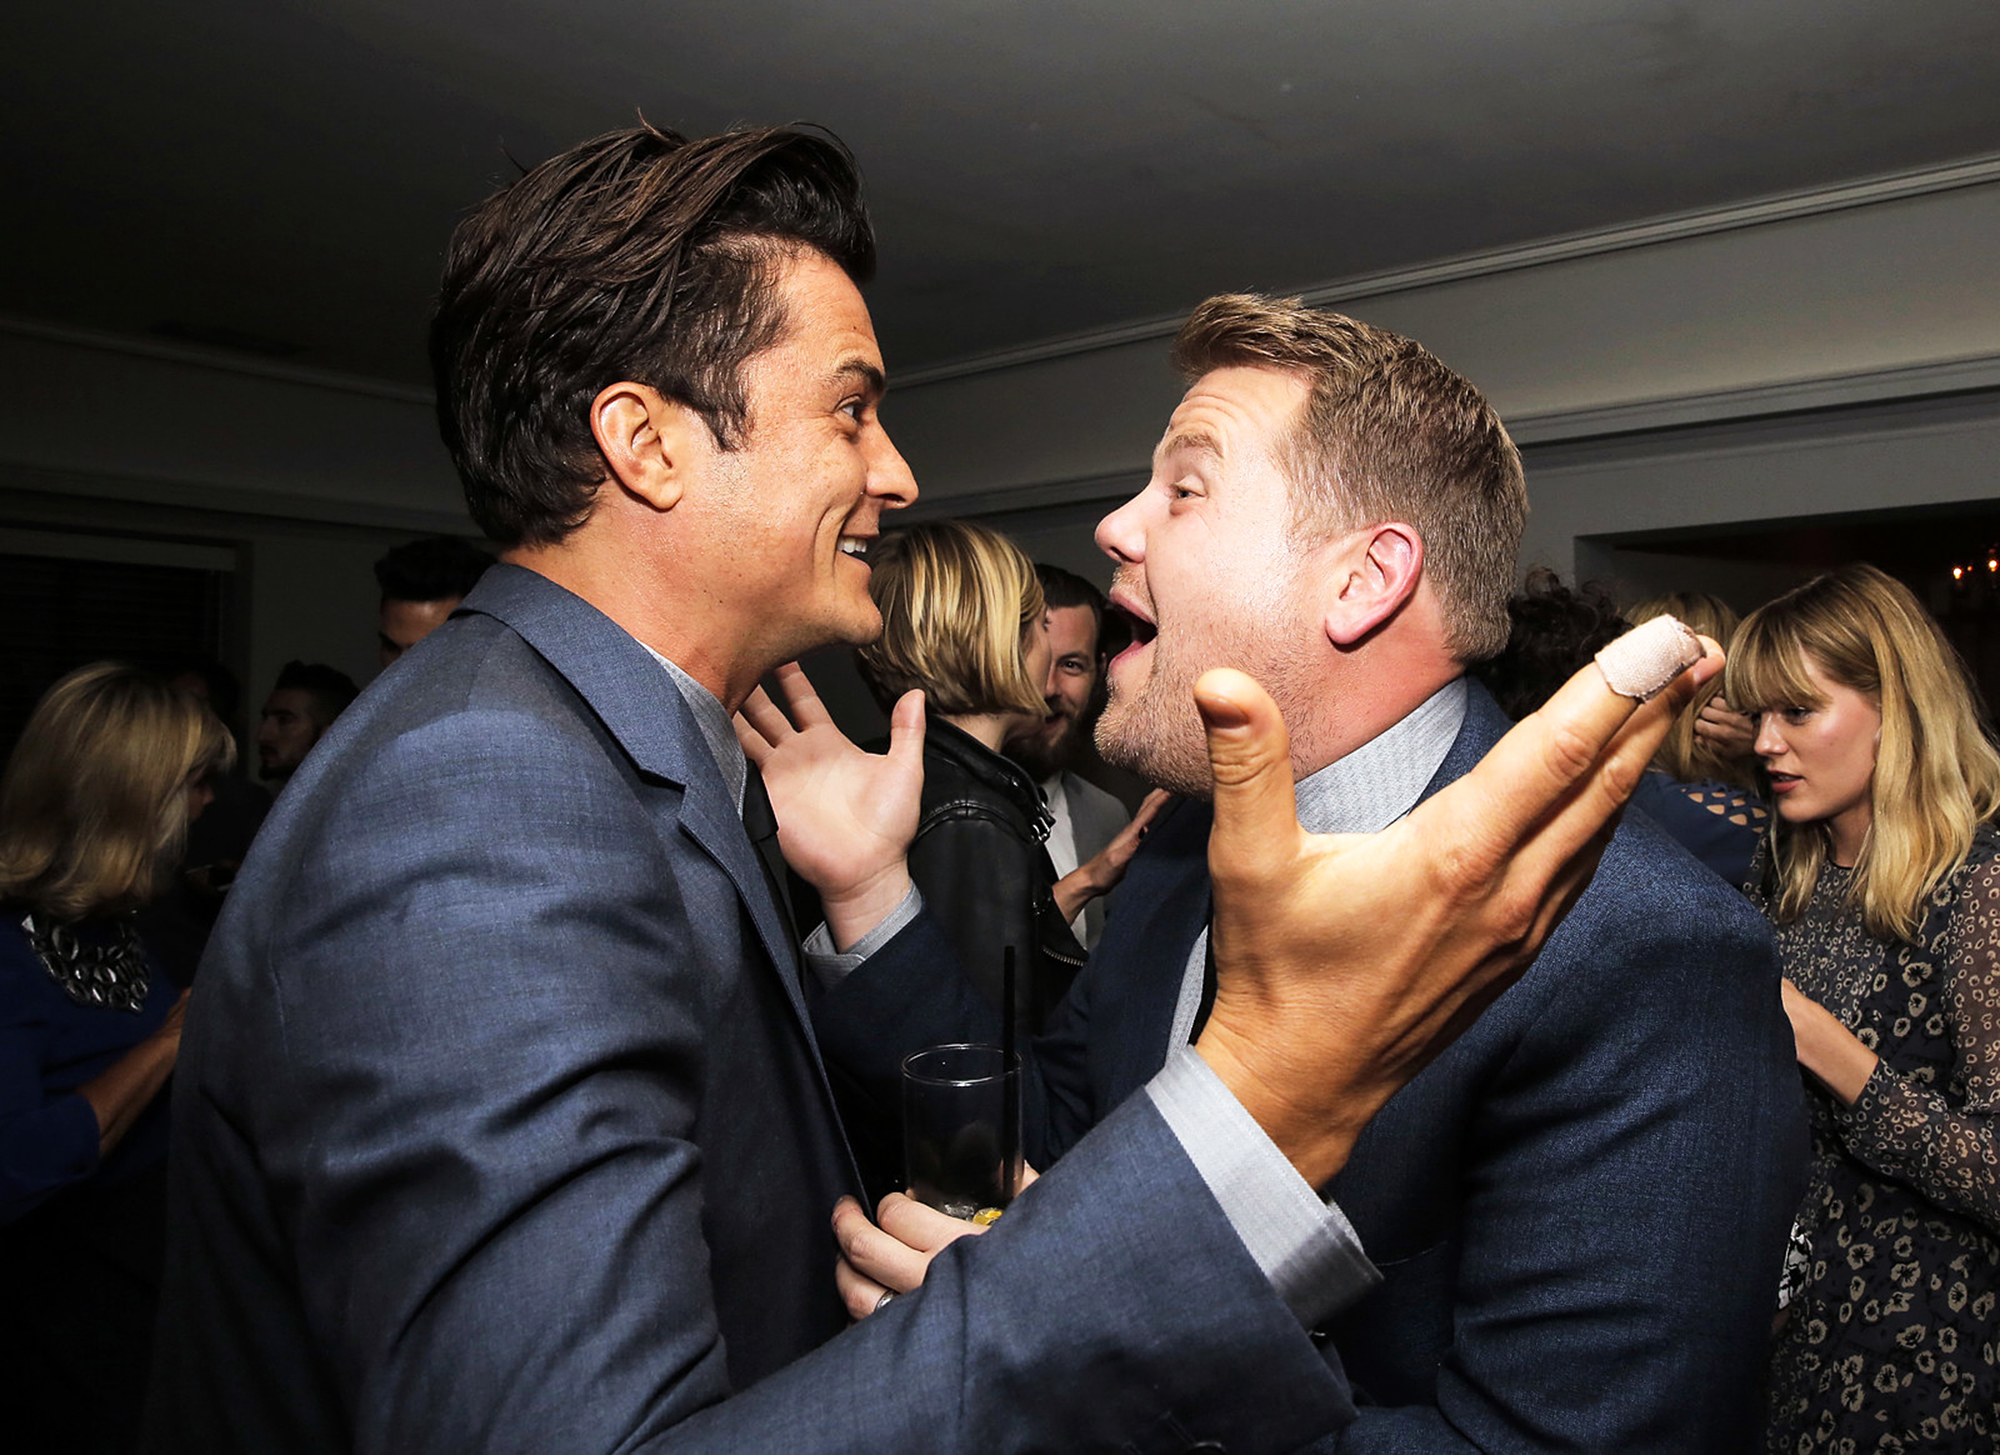 Orlando Bloom and James Corden celebrate the 2015 British Academy Britannia Awards in Los Angeles, on Oct. 29, 2015.